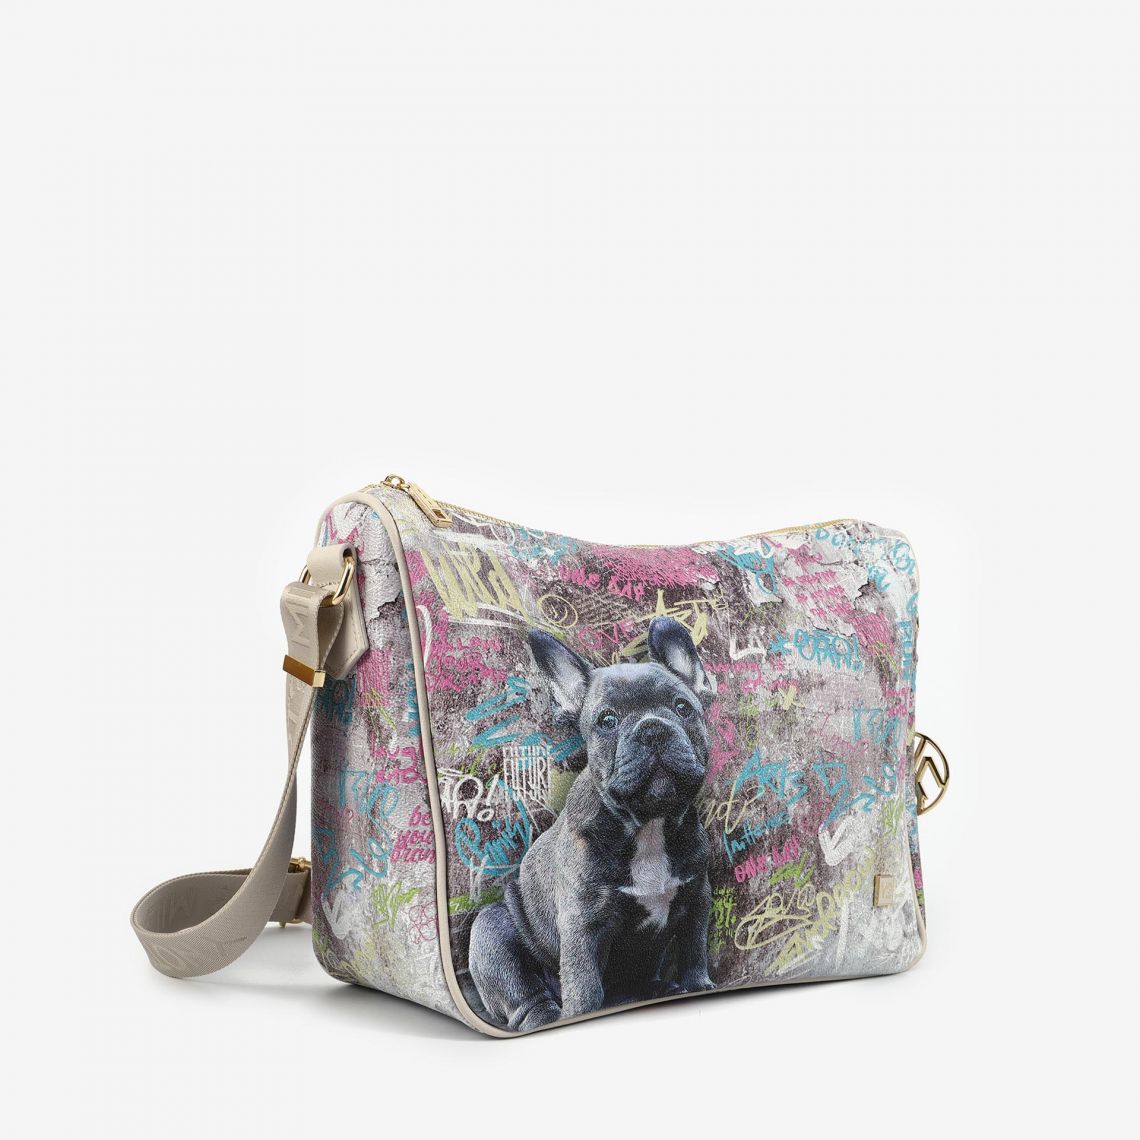 borsa donne Tracolla Dog Wall le sac outlet borse y not